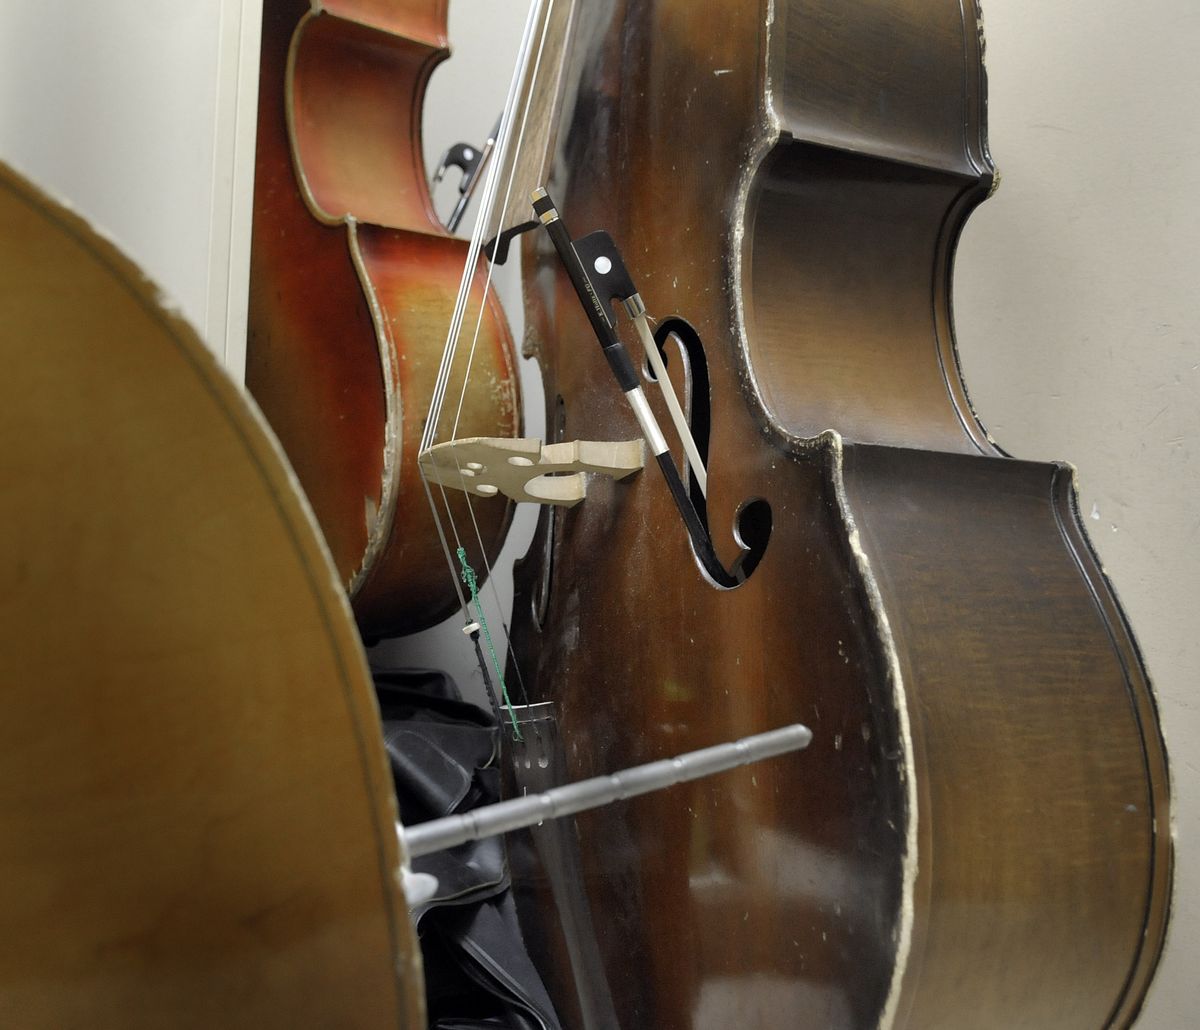 Some of the band instruments at Lewis and Clark High School show their age.  (CHRISTOPHER ANDERSON / The Spokesman-Review)